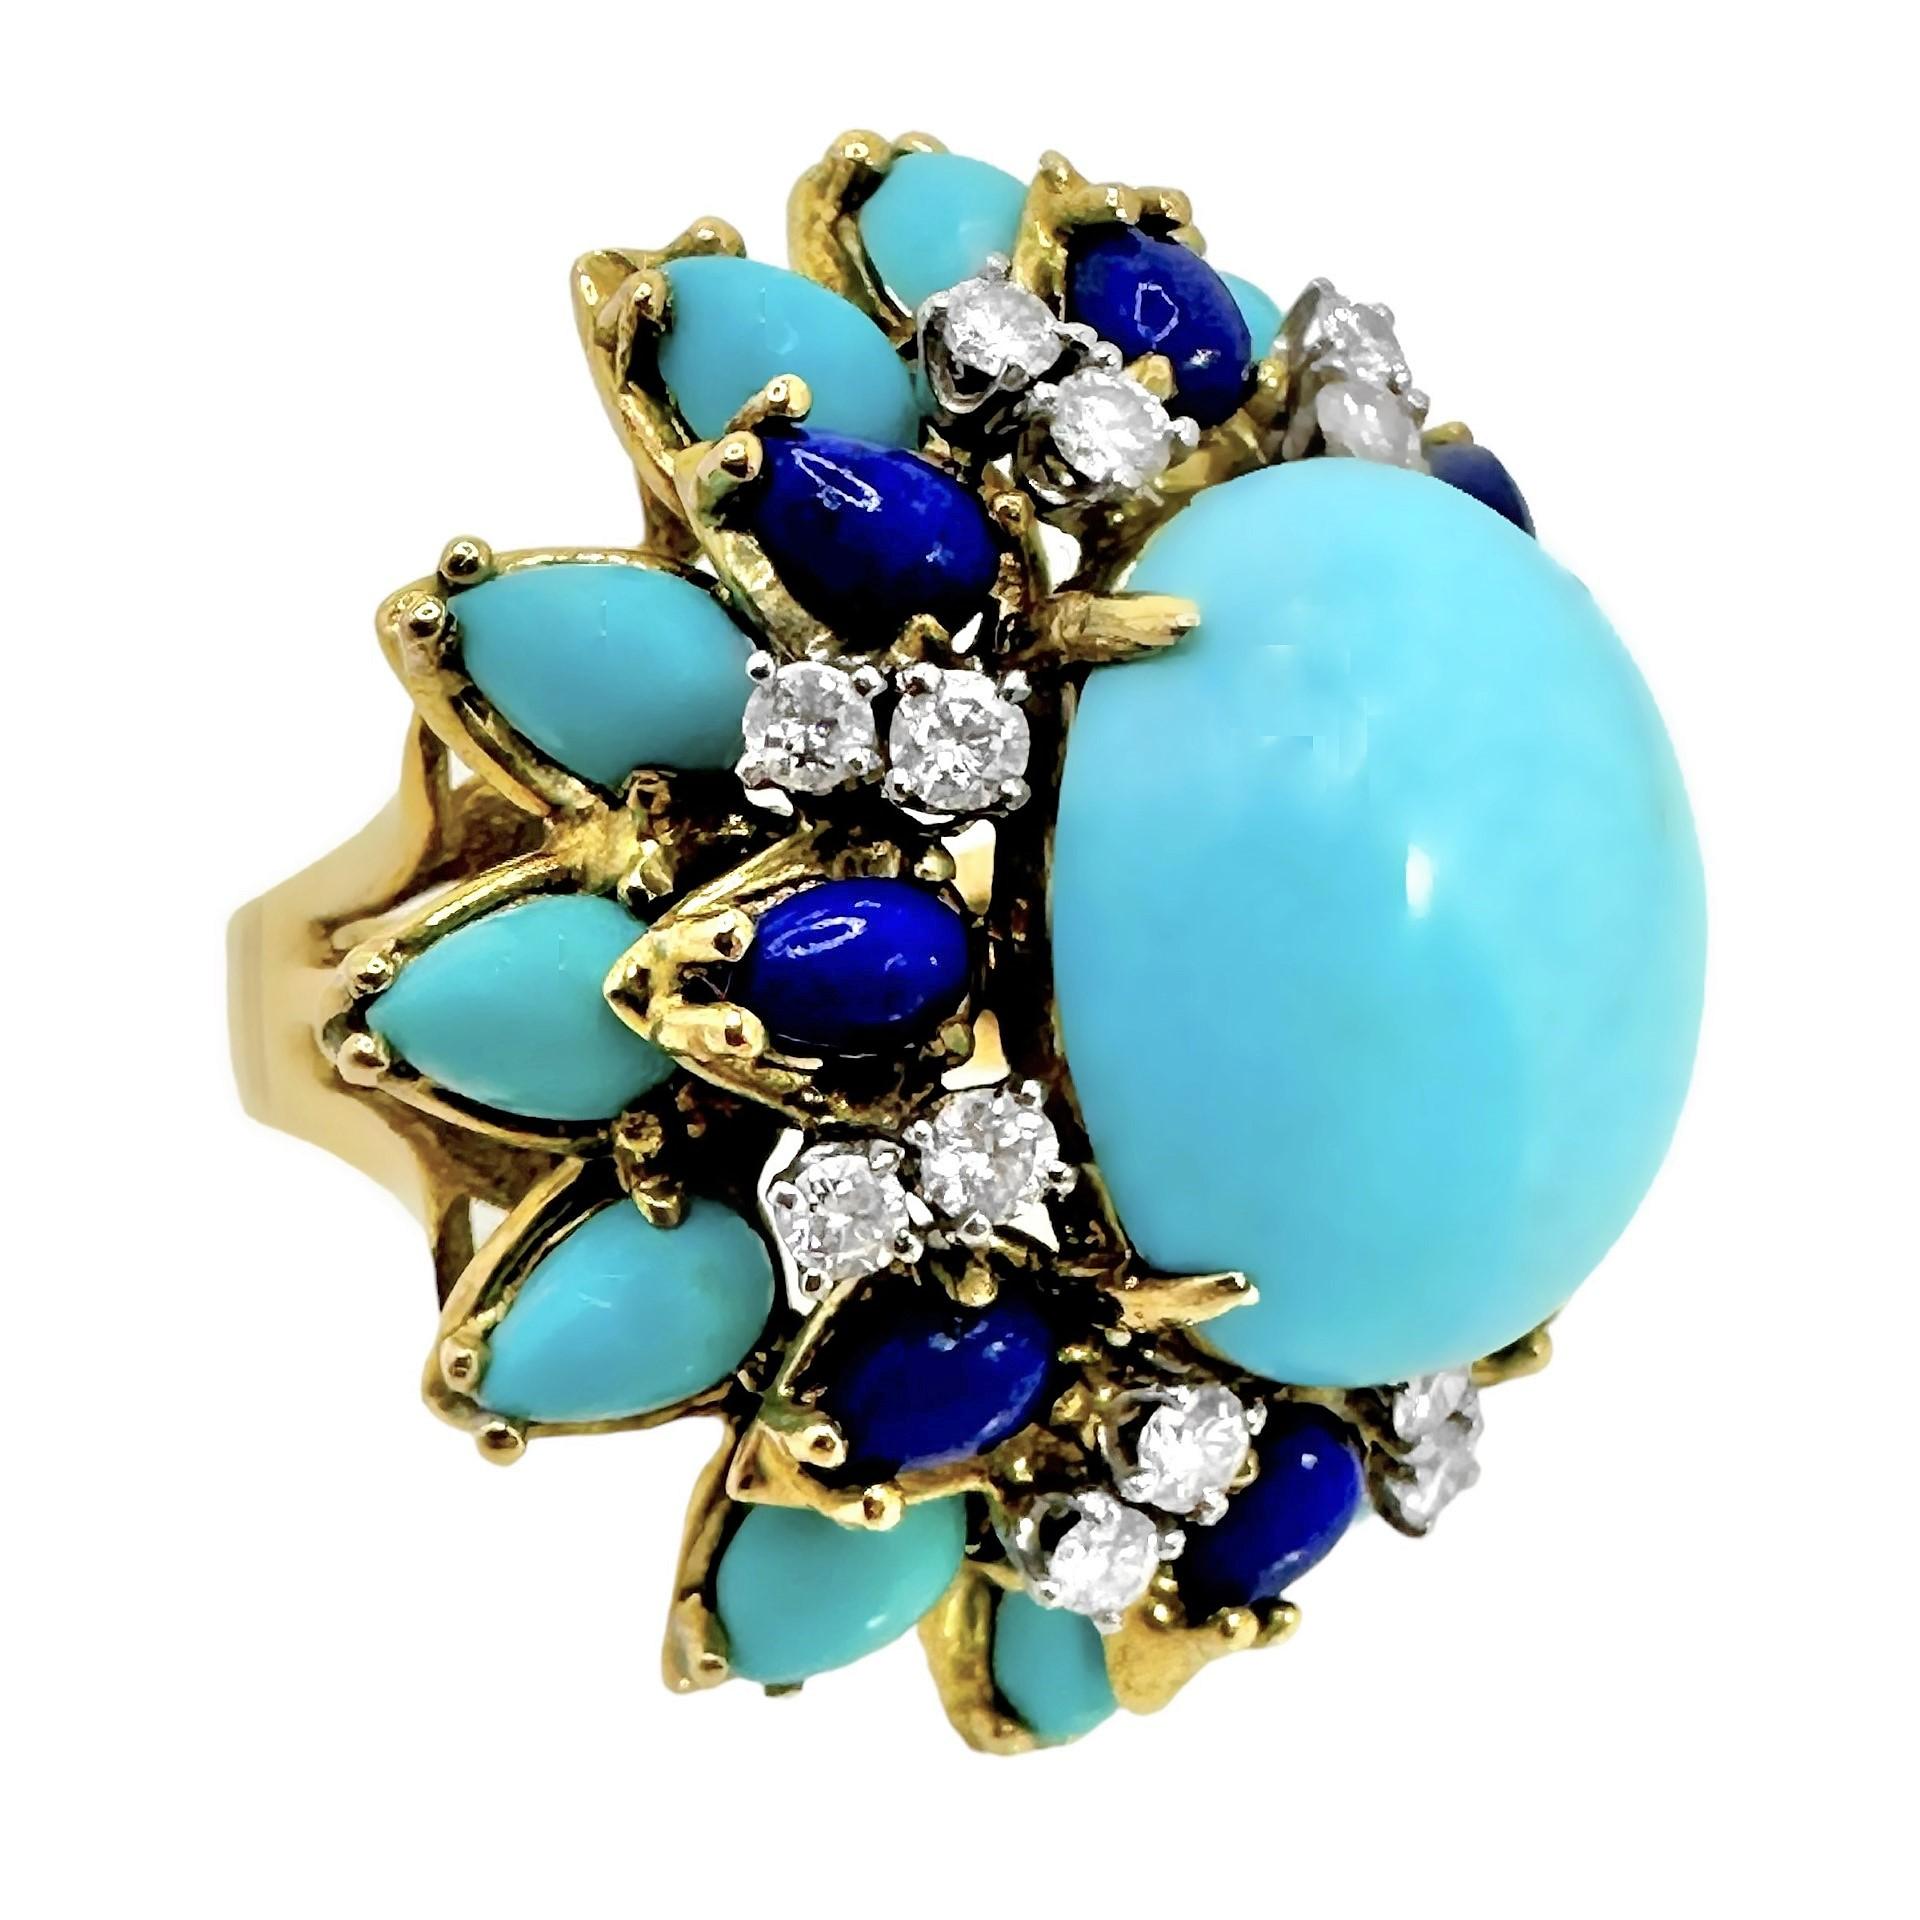 This very lovely and large scale, Mid-20th Century cocktail ring, fashioned from 14k yellow gold, is truly the personification of the big, bold and expansive feeling of the 1960's. It is a high dome design with one oval turquoise cabochon measuring